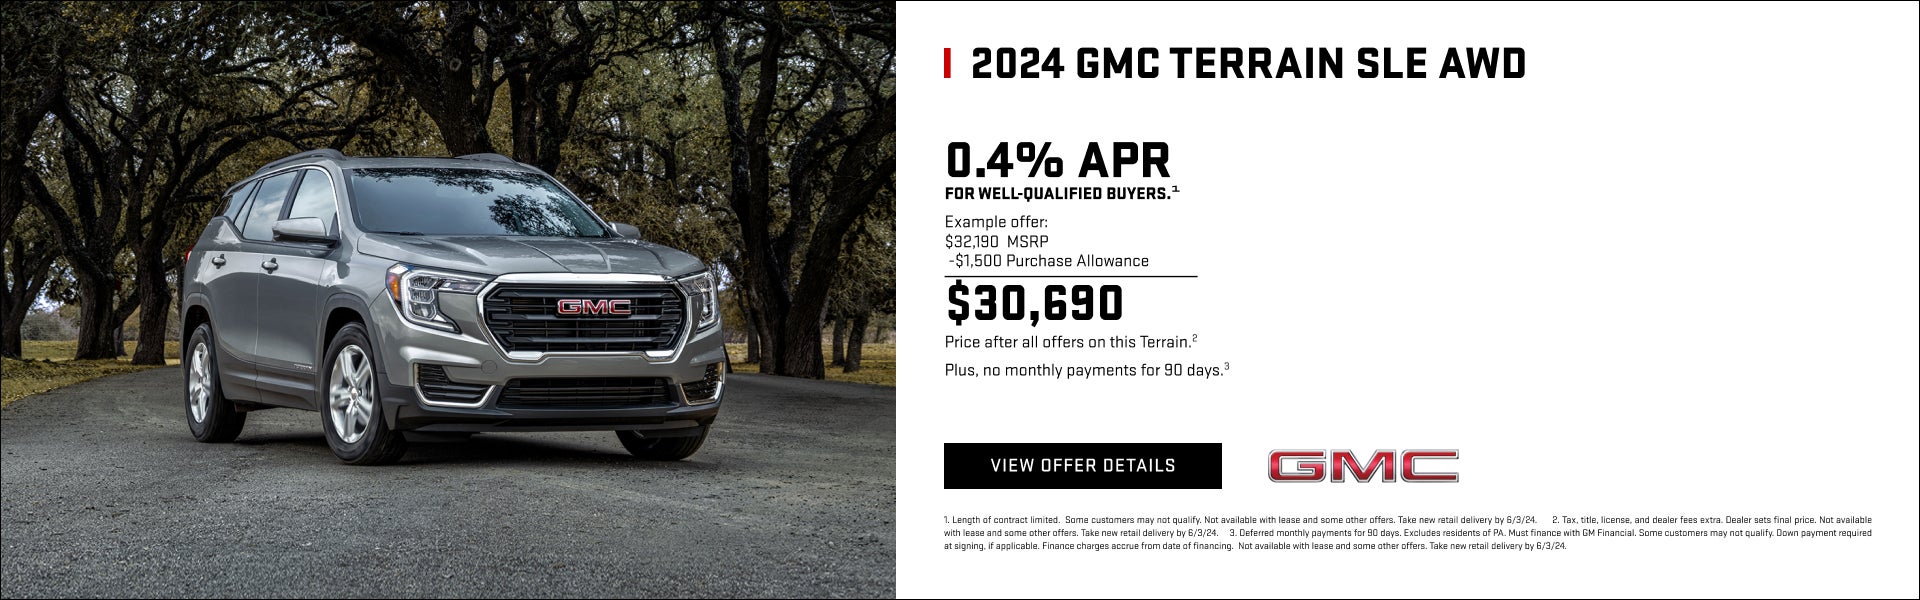 0.4% APR for well-qualified buyers.1

Example offer:
$32,190 MSRP
$1,500 Purchase Allowance
$30,6...